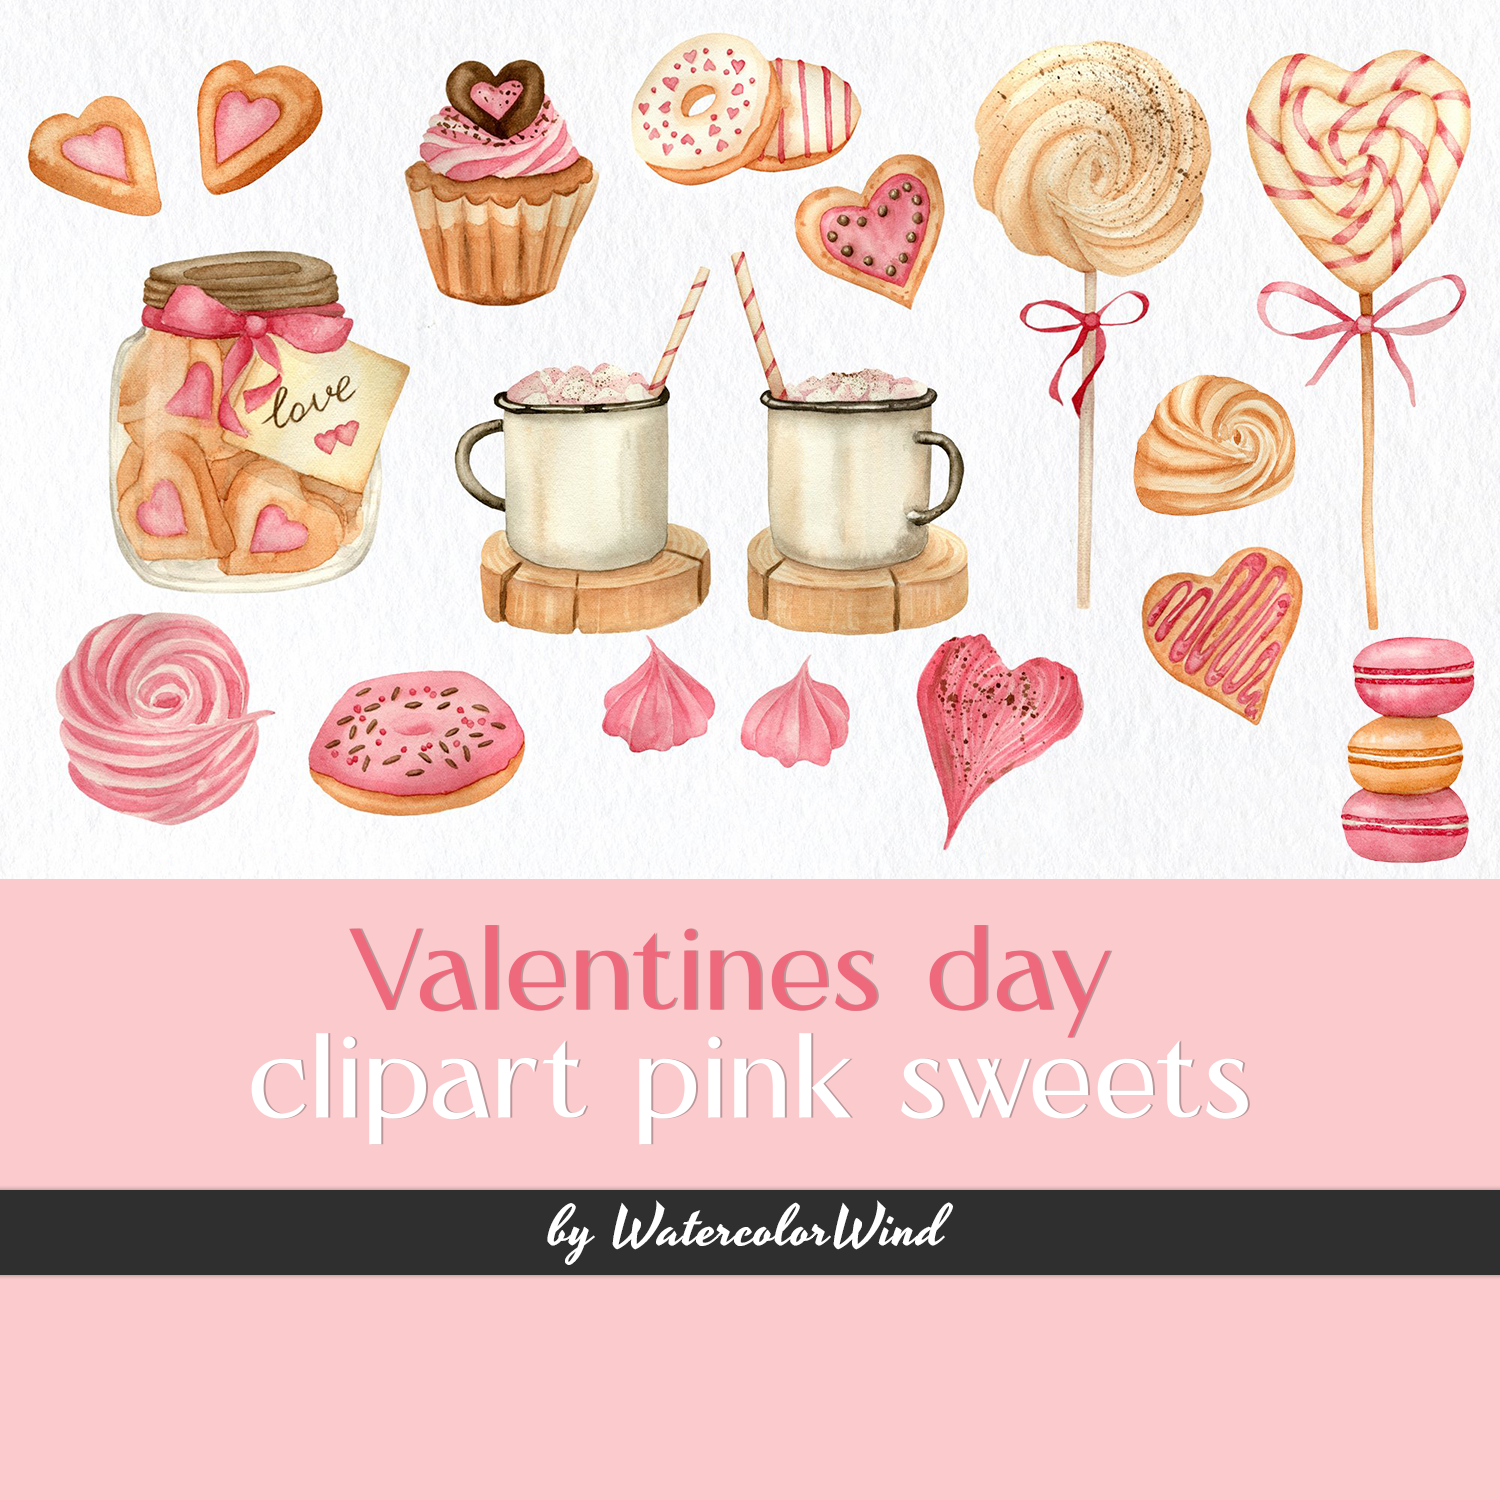 Illustration valentines day clipart pink sweets.